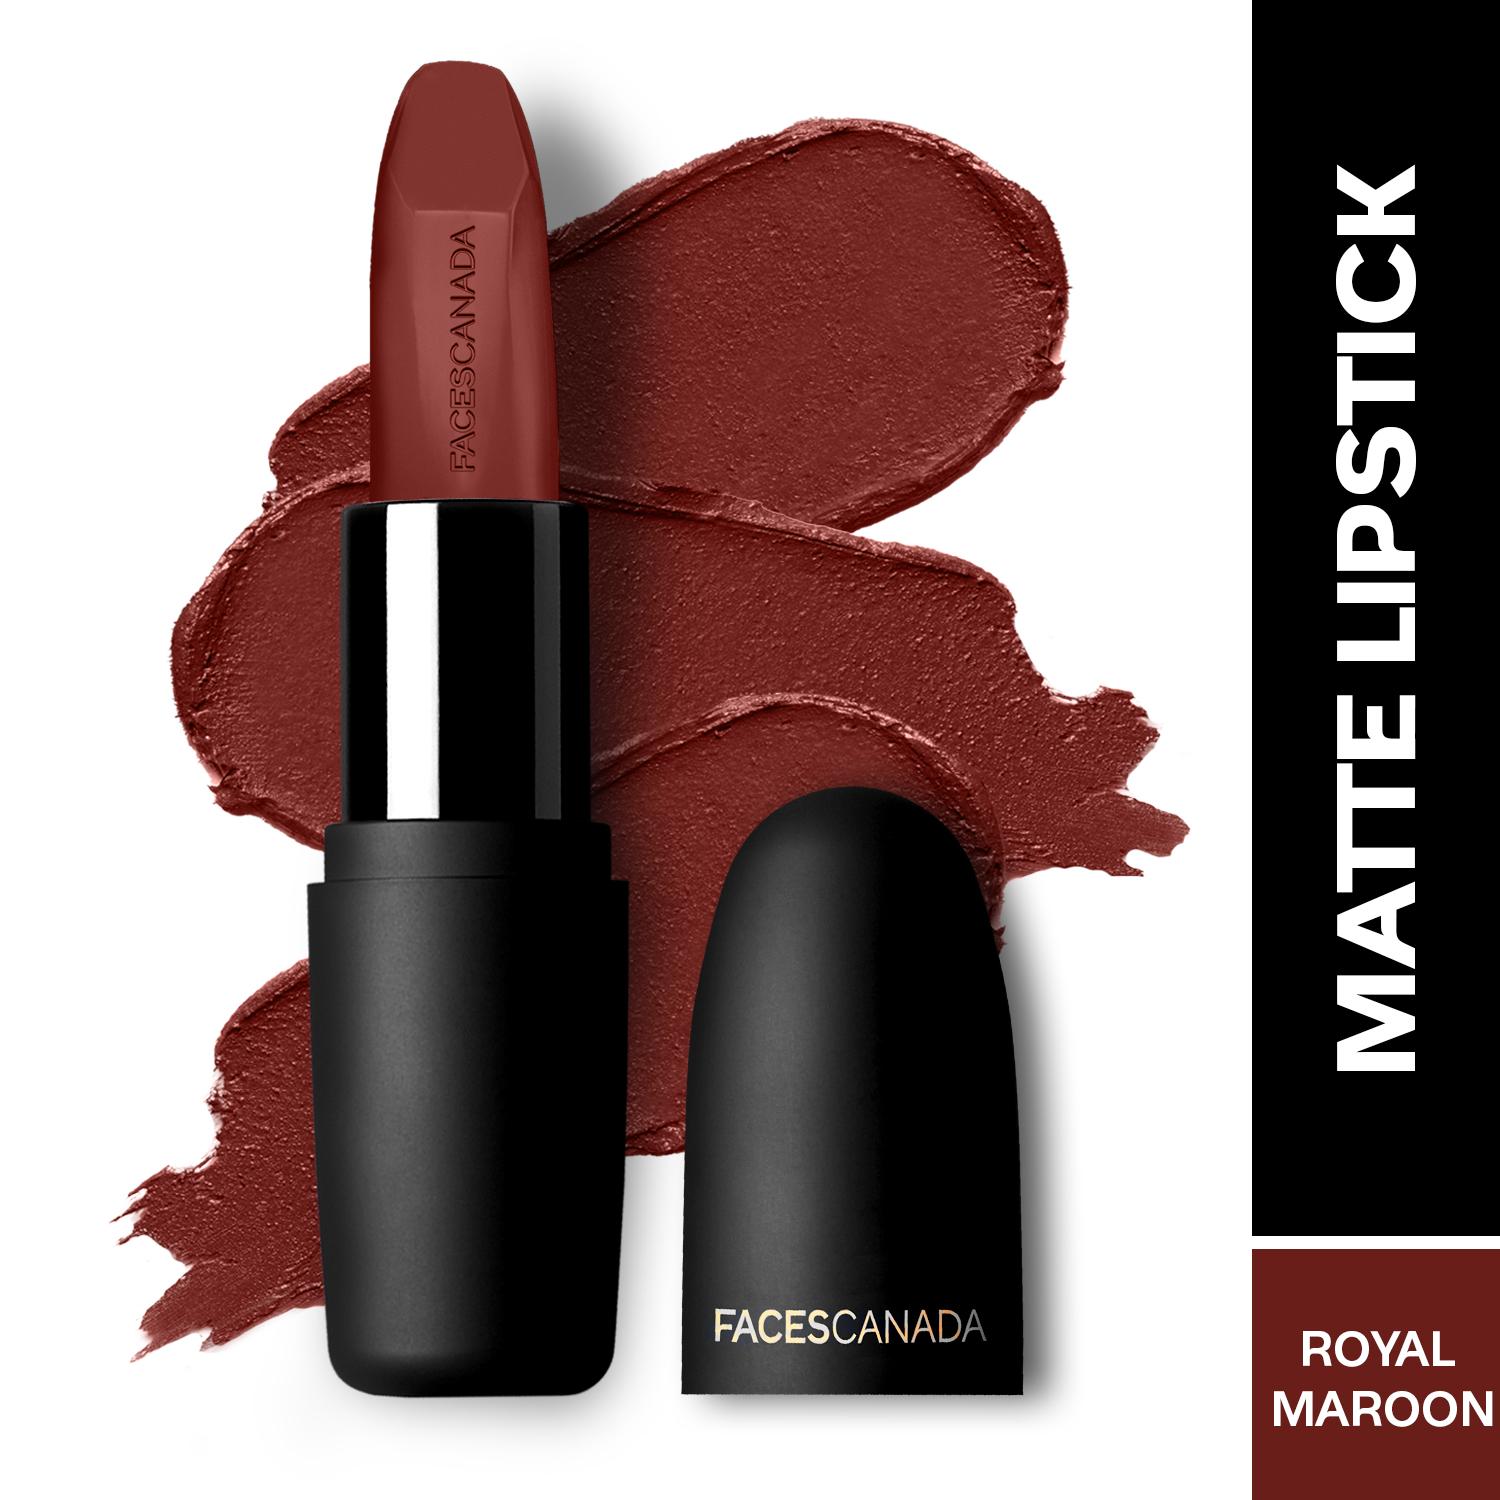 Faces Canada | Faces Canada Weightless Matte Lipstick, Pigmented and Hydrated Lips - Royal Maroon 16 (4.5 g)